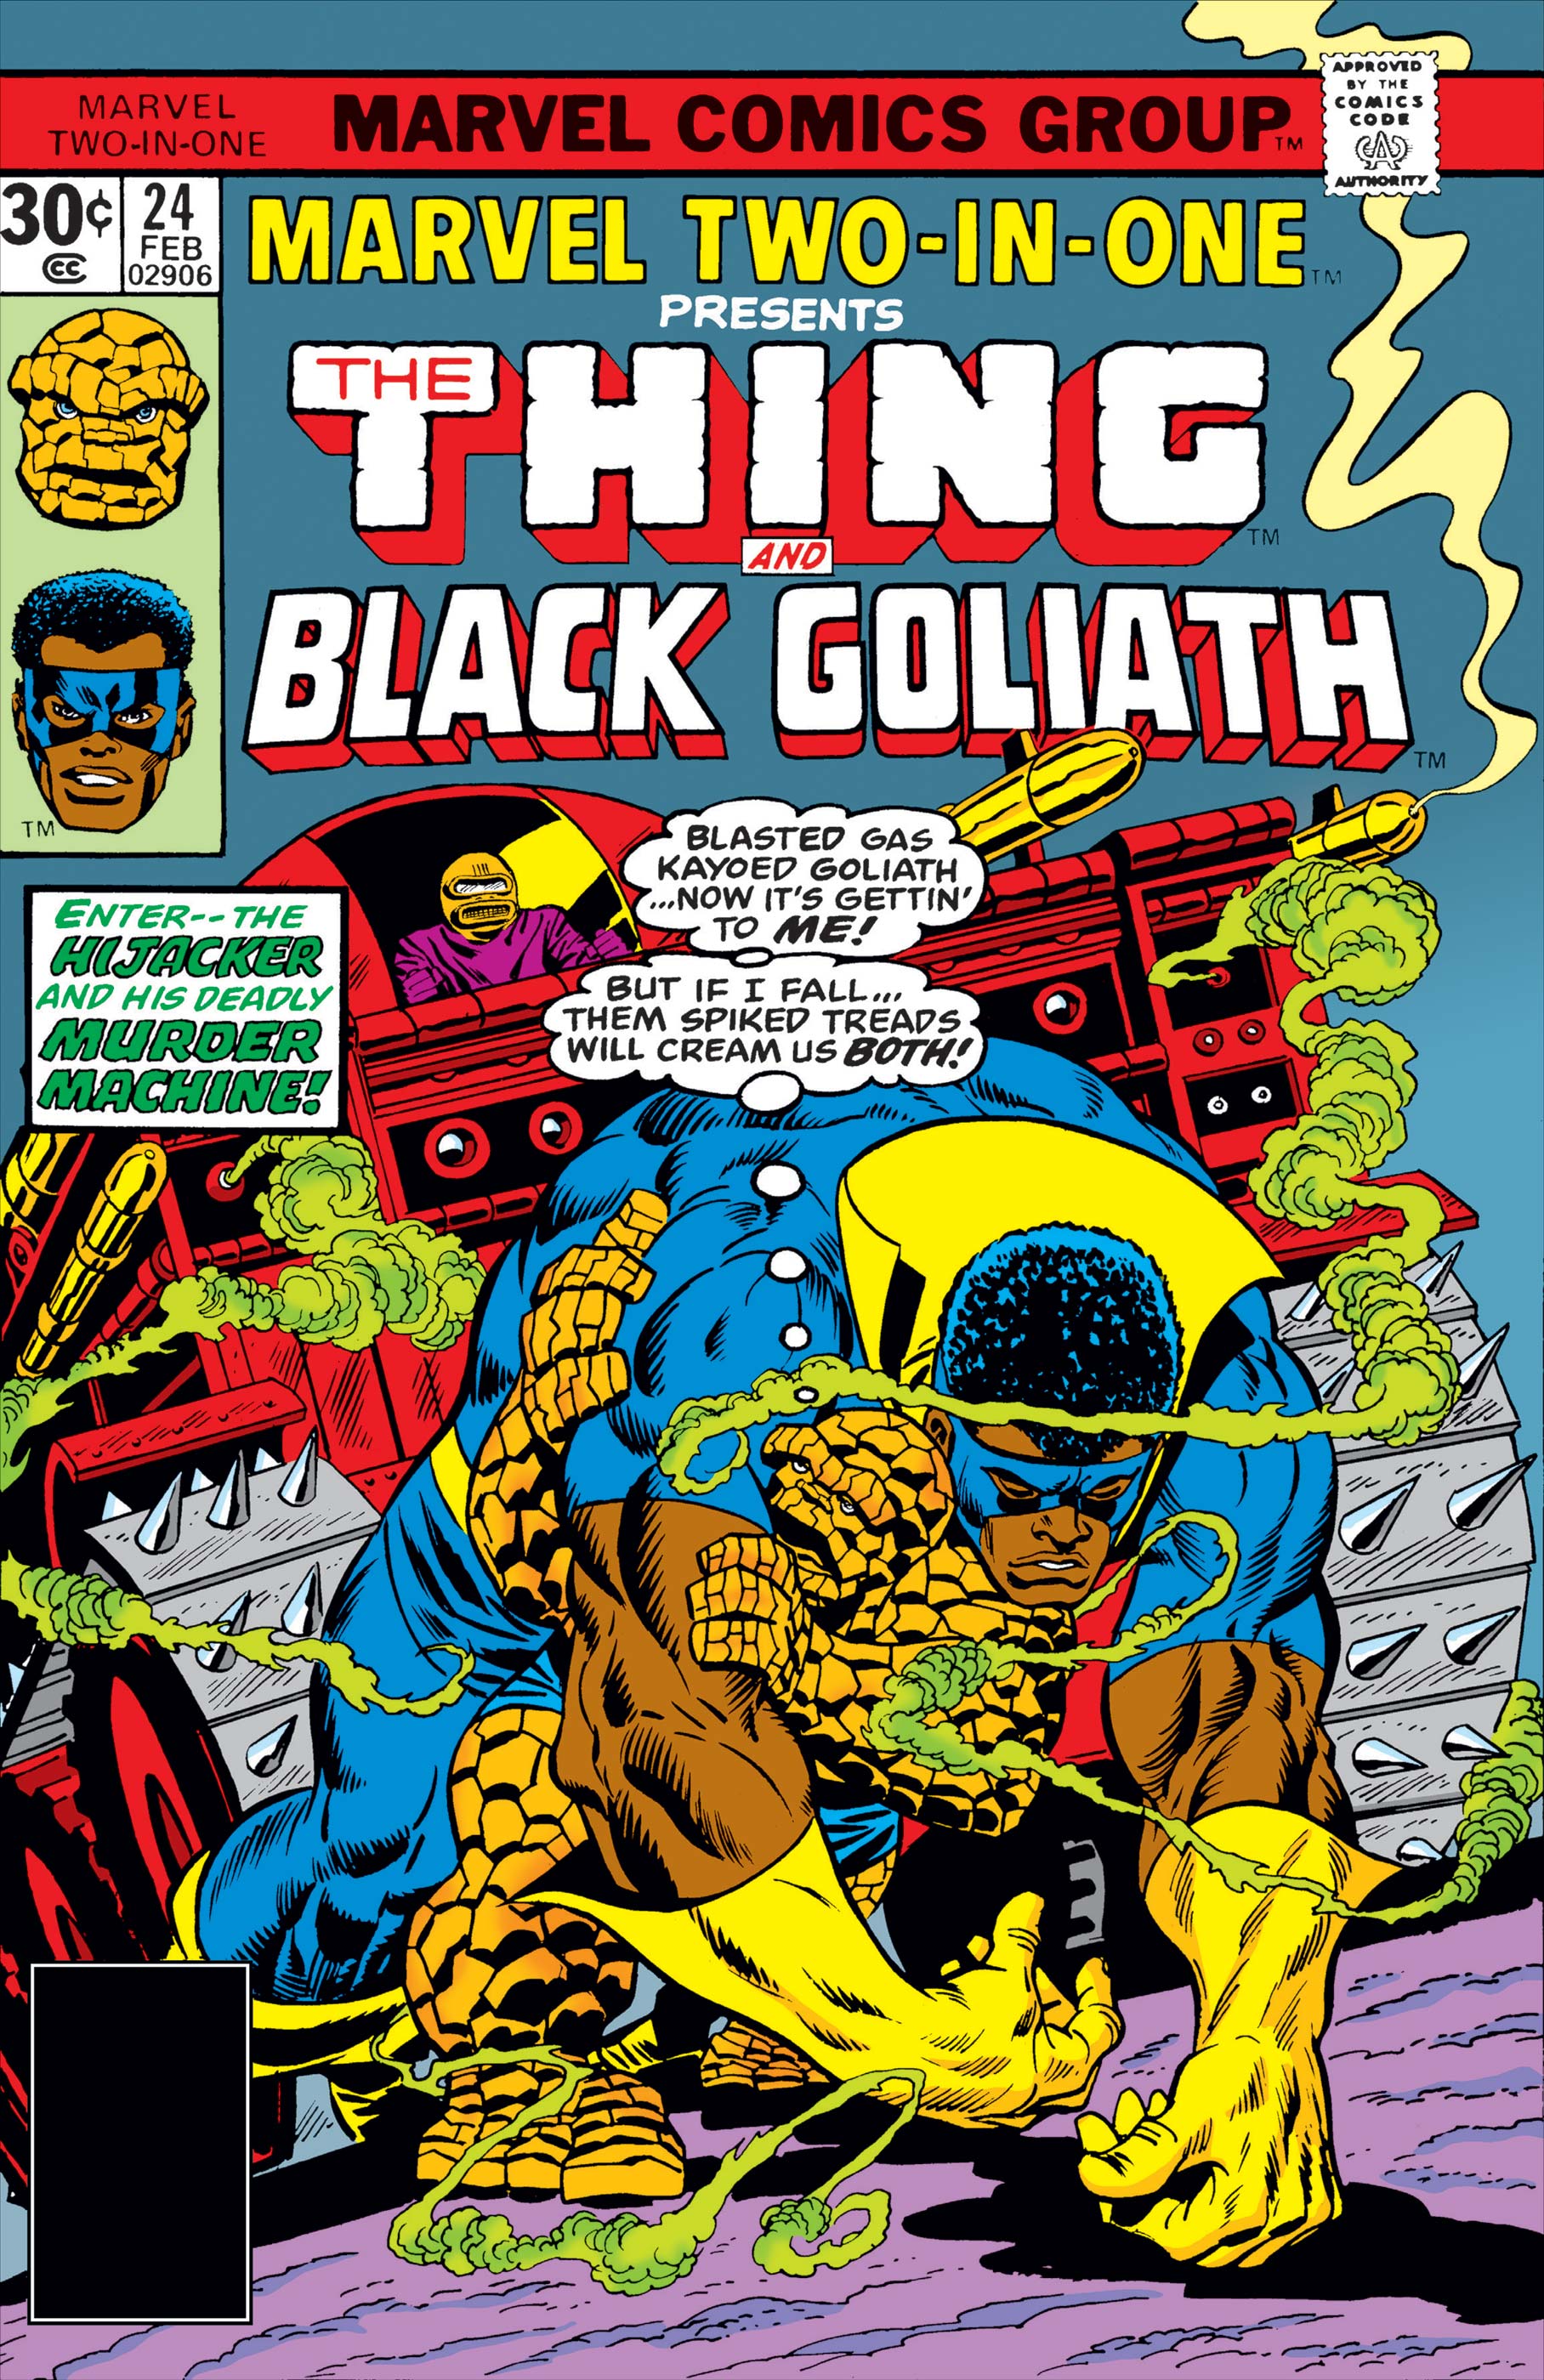 Marvel Two-in-One (1974) #24